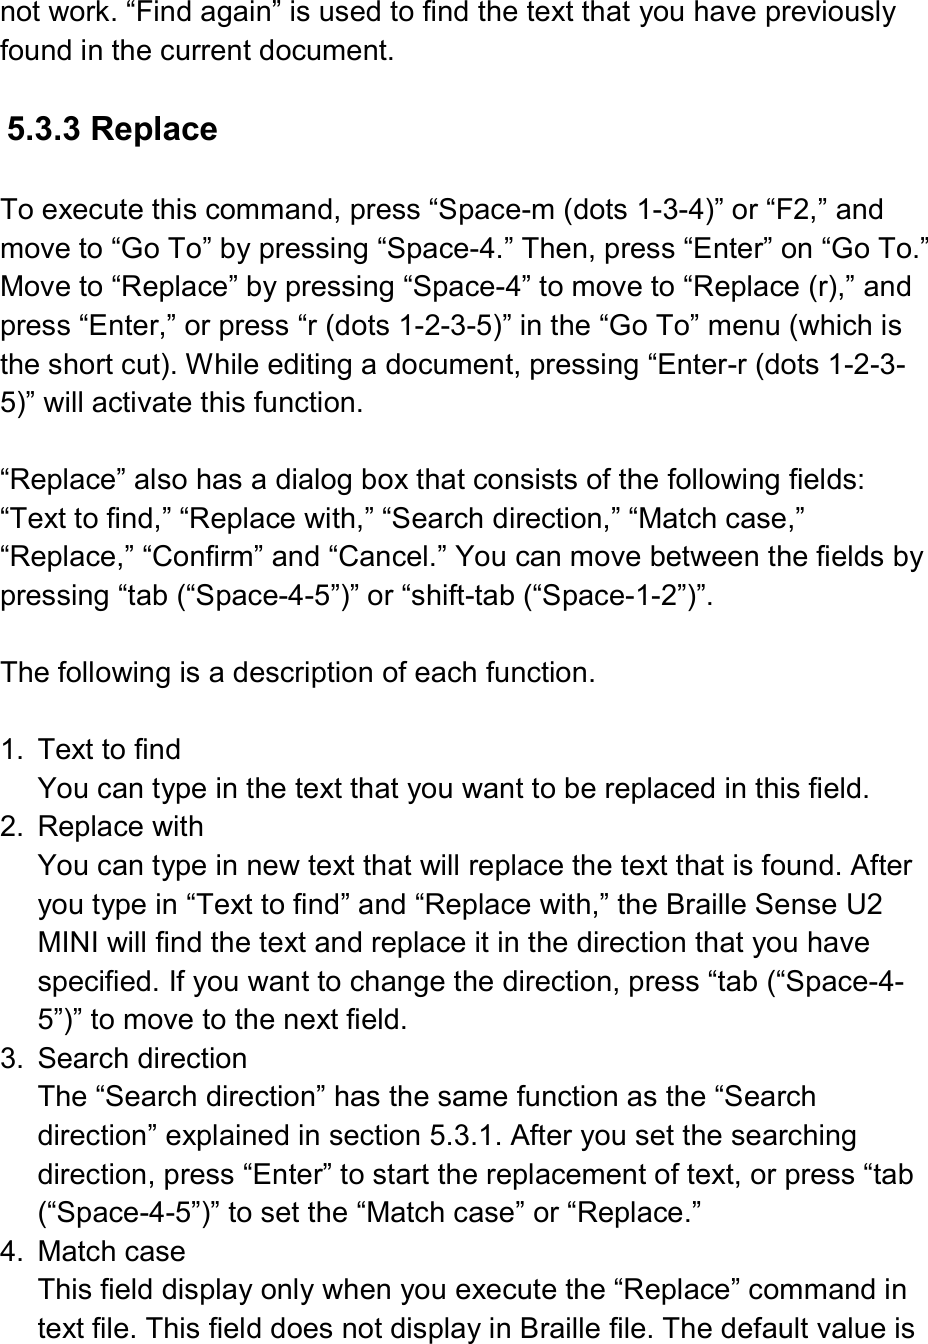  not work. “Find again” is used to find the text that you have previously found in the current document.  5.3.3 Replace  To execute this command, press “Space-m (dots 1-3-4)” or “F2,” and move to “Go To” by pressing “Space-4.” Then, press “Enter” on “Go To.” Move to “Replace” by pressing “Space-4” to move to “Replace (r),” and press “Enter,” or press “r (dots 1-2-3-5)” in the “Go To” menu (which is the short cut). While editing a document, pressing “Enter-r (dots 1-2-3-5)” will activate this function.  “Replace” also has a dialog box that consists of the following fields: “Text to find,” “Replace with,” “Search direction,” “Match case,” “Replace,” “Confirm” and “Cancel.” You can move between the fields by pressing “tab (“Space-4-5”)” or “shift-tab (“Space-1-2”)”.  The following is a description of each function.  1.  Text to find You can type in the text that you want to be replaced in this field. 2.  Replace with You can type in new text that will replace the text that is found. After you type in “Text to find” and “Replace with,” the Braille Sense U2 MINI will find the text and replace it in the direction that you have specified. If you want to change the direction, press “tab (“Space-4-5”)” to move to the next field. 3.  Search direction The “Search direction” has the same function as the “Search direction” explained in section 5.3.1. After you set the searching direction, press “Enter” to start the replacement of text, or press “tab (“Space-4-5”)” to set the “Match case” or “Replace.” 4.  Match case This field display only when you execute the “Replace” command in text file. This field does not display in Braille file. The default value is 